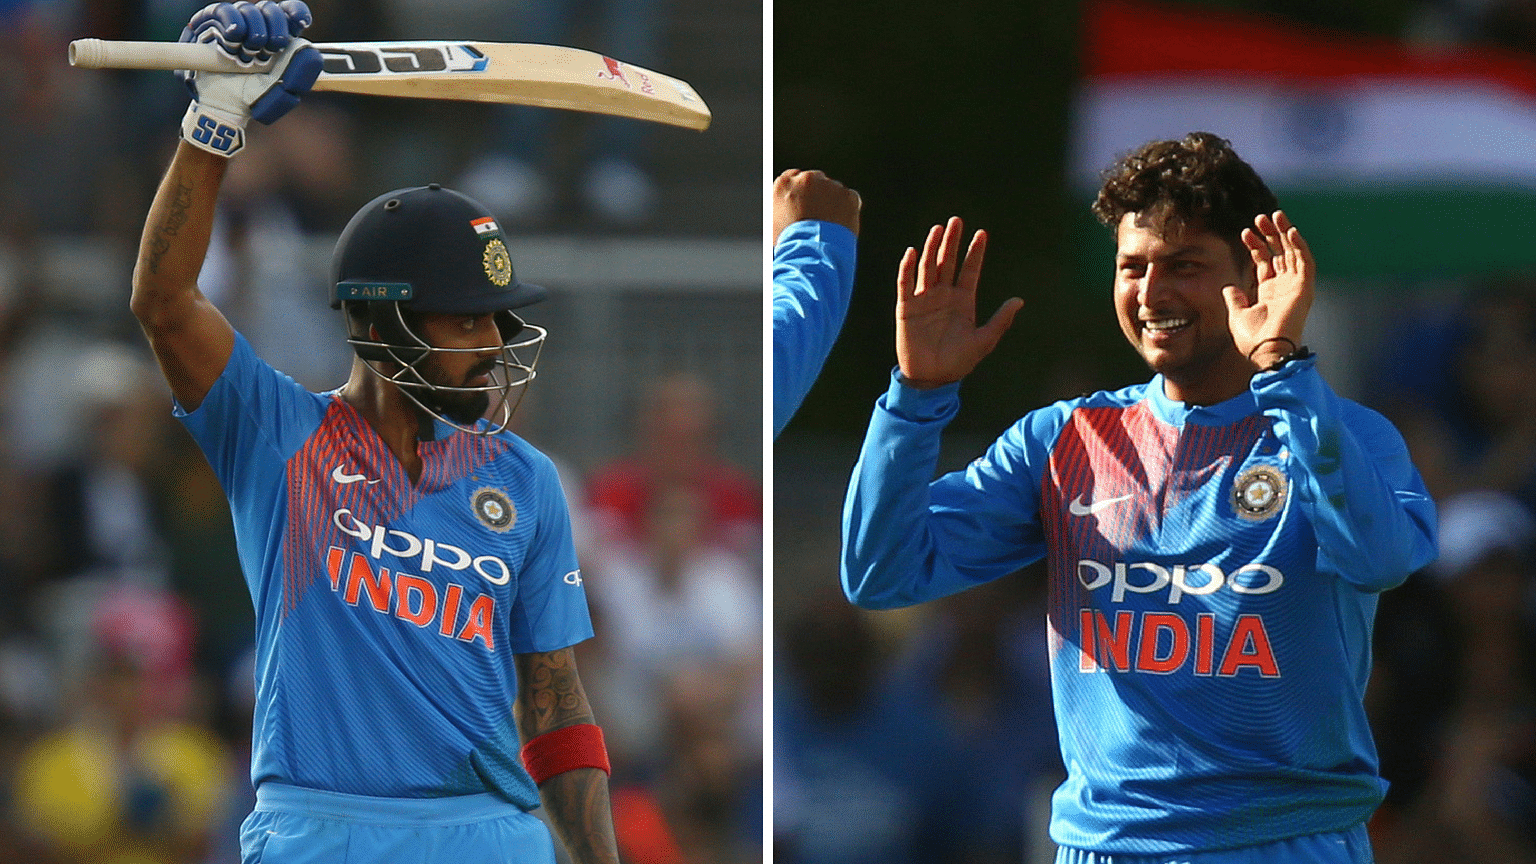 KL Rahul scored his second T20 century and Kuldeep Yadav picked up his first T20 fifer as India beat England by 8 wickets at Old Trafford.